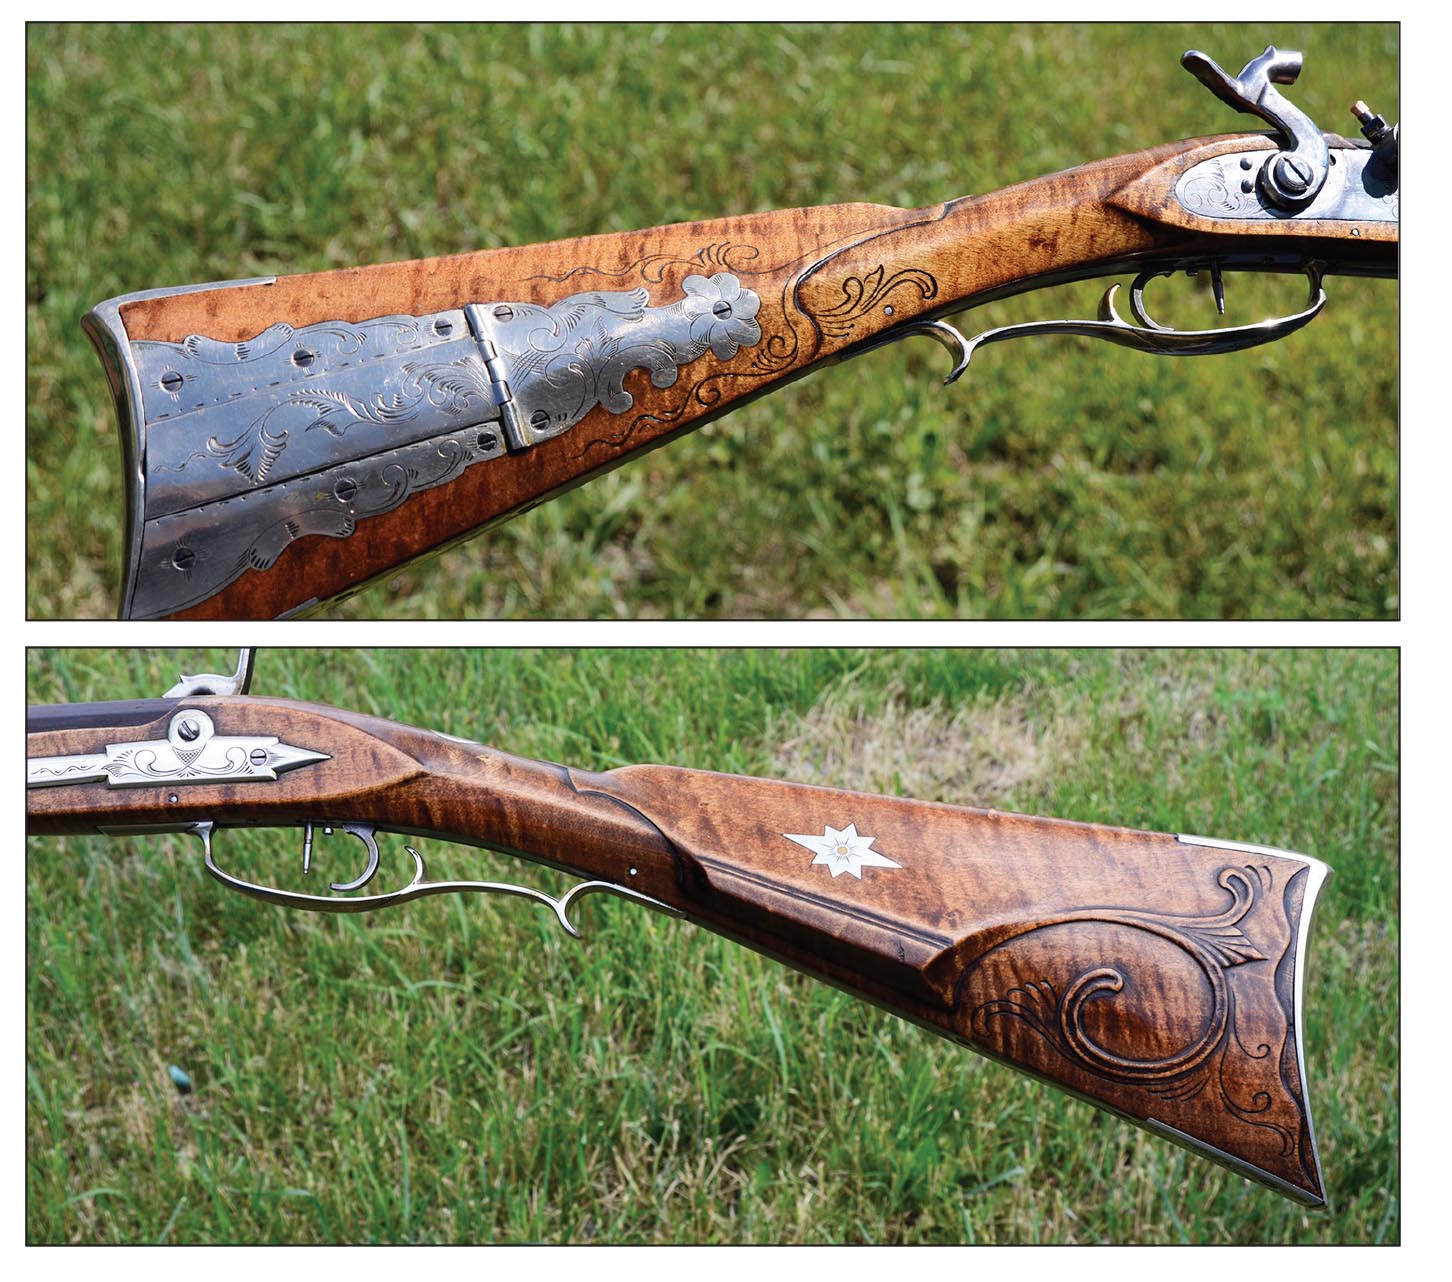 Mike bought the Kentucky long rifle because it was so ornate.